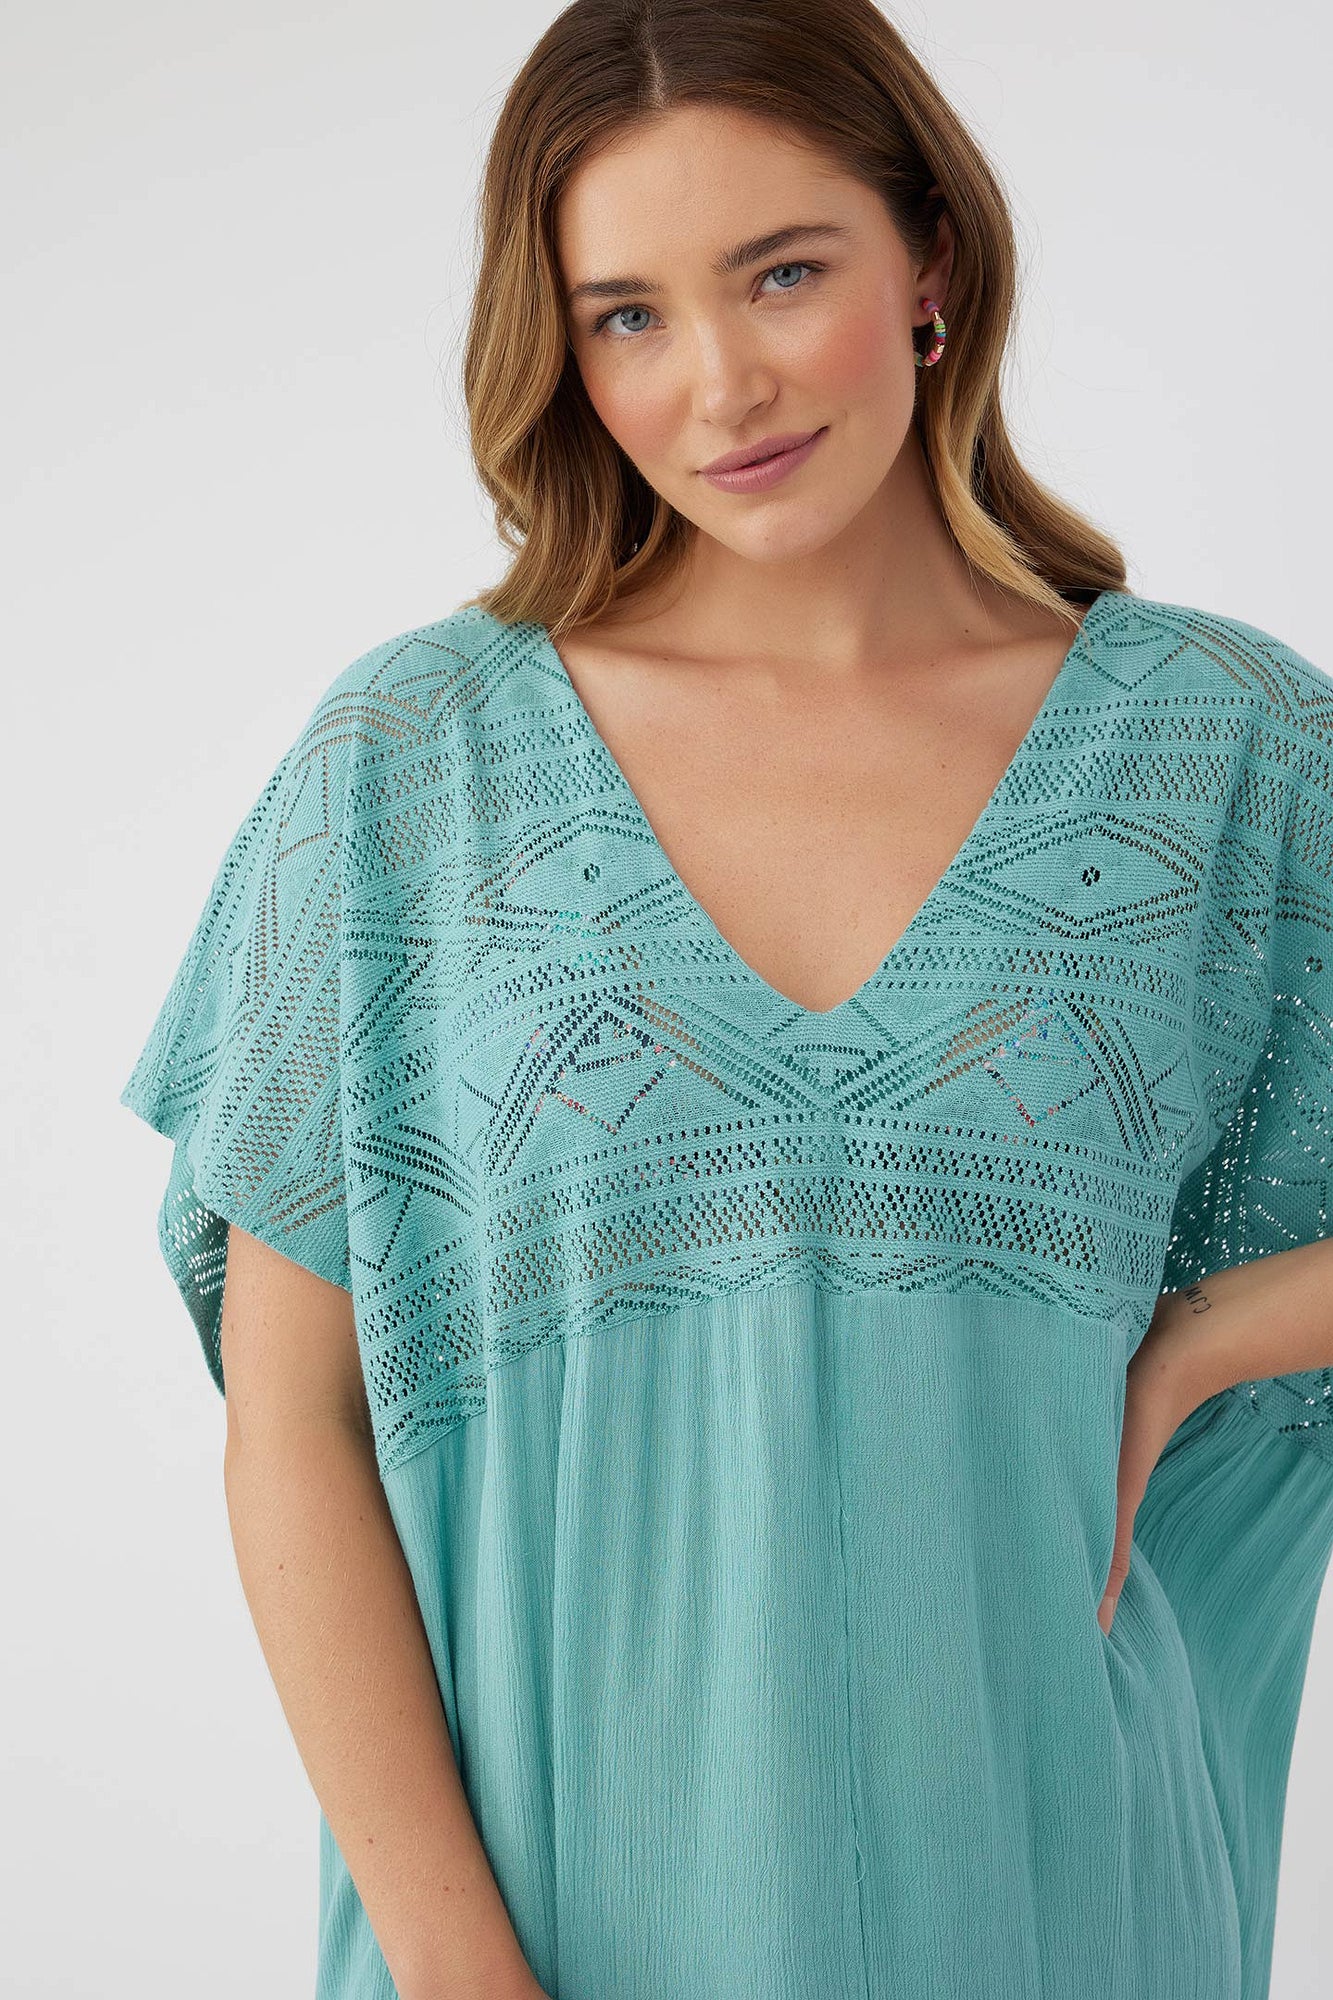 O'Neill Desi Cover Up Dress - Shaddow & Fish